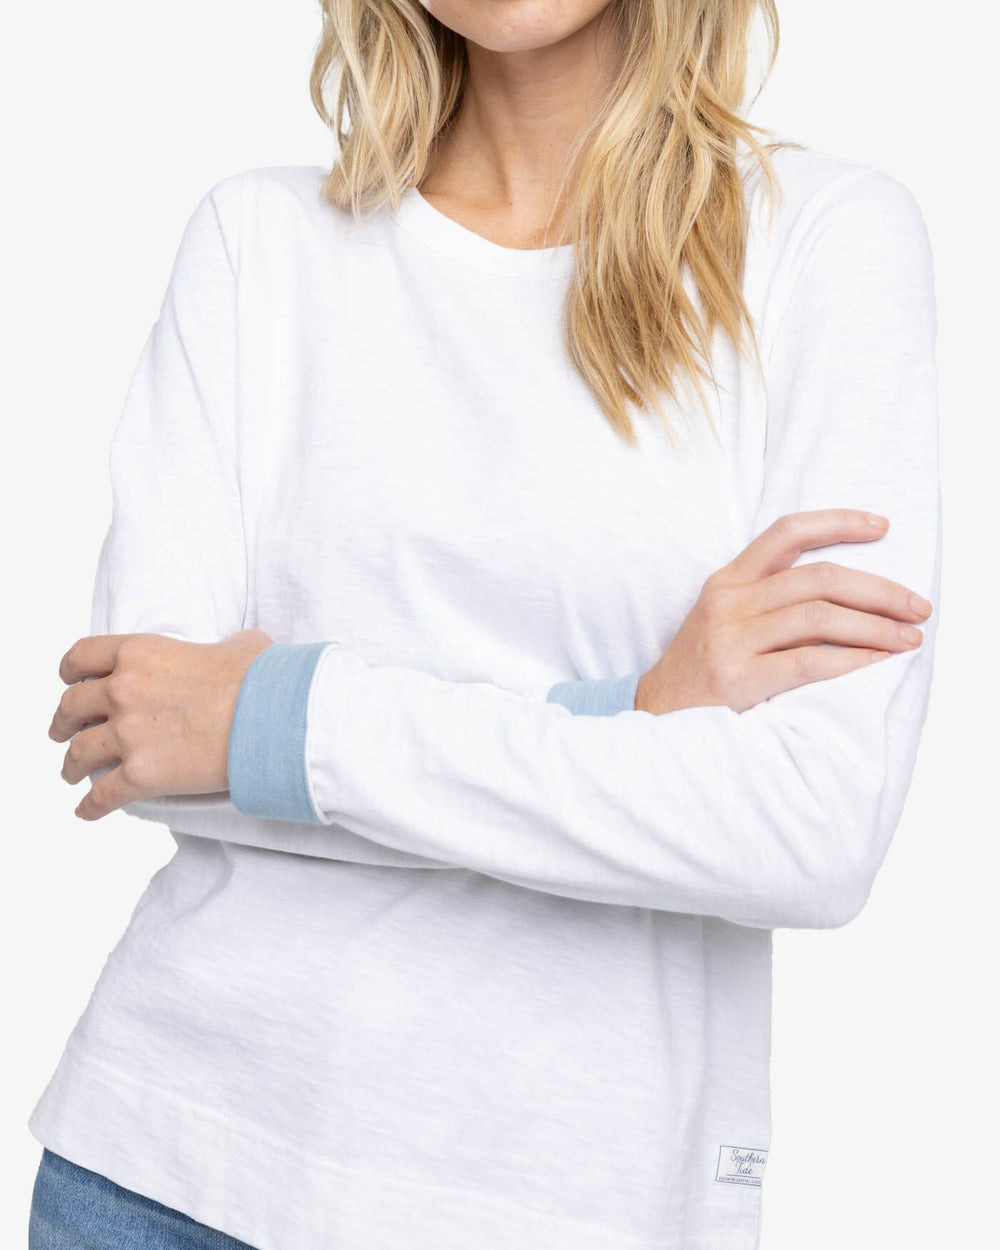 The detail view of the Southern Tide Kimmy Crew Neck Long Sleeve T-Shirt by Southern Tide - Classic White